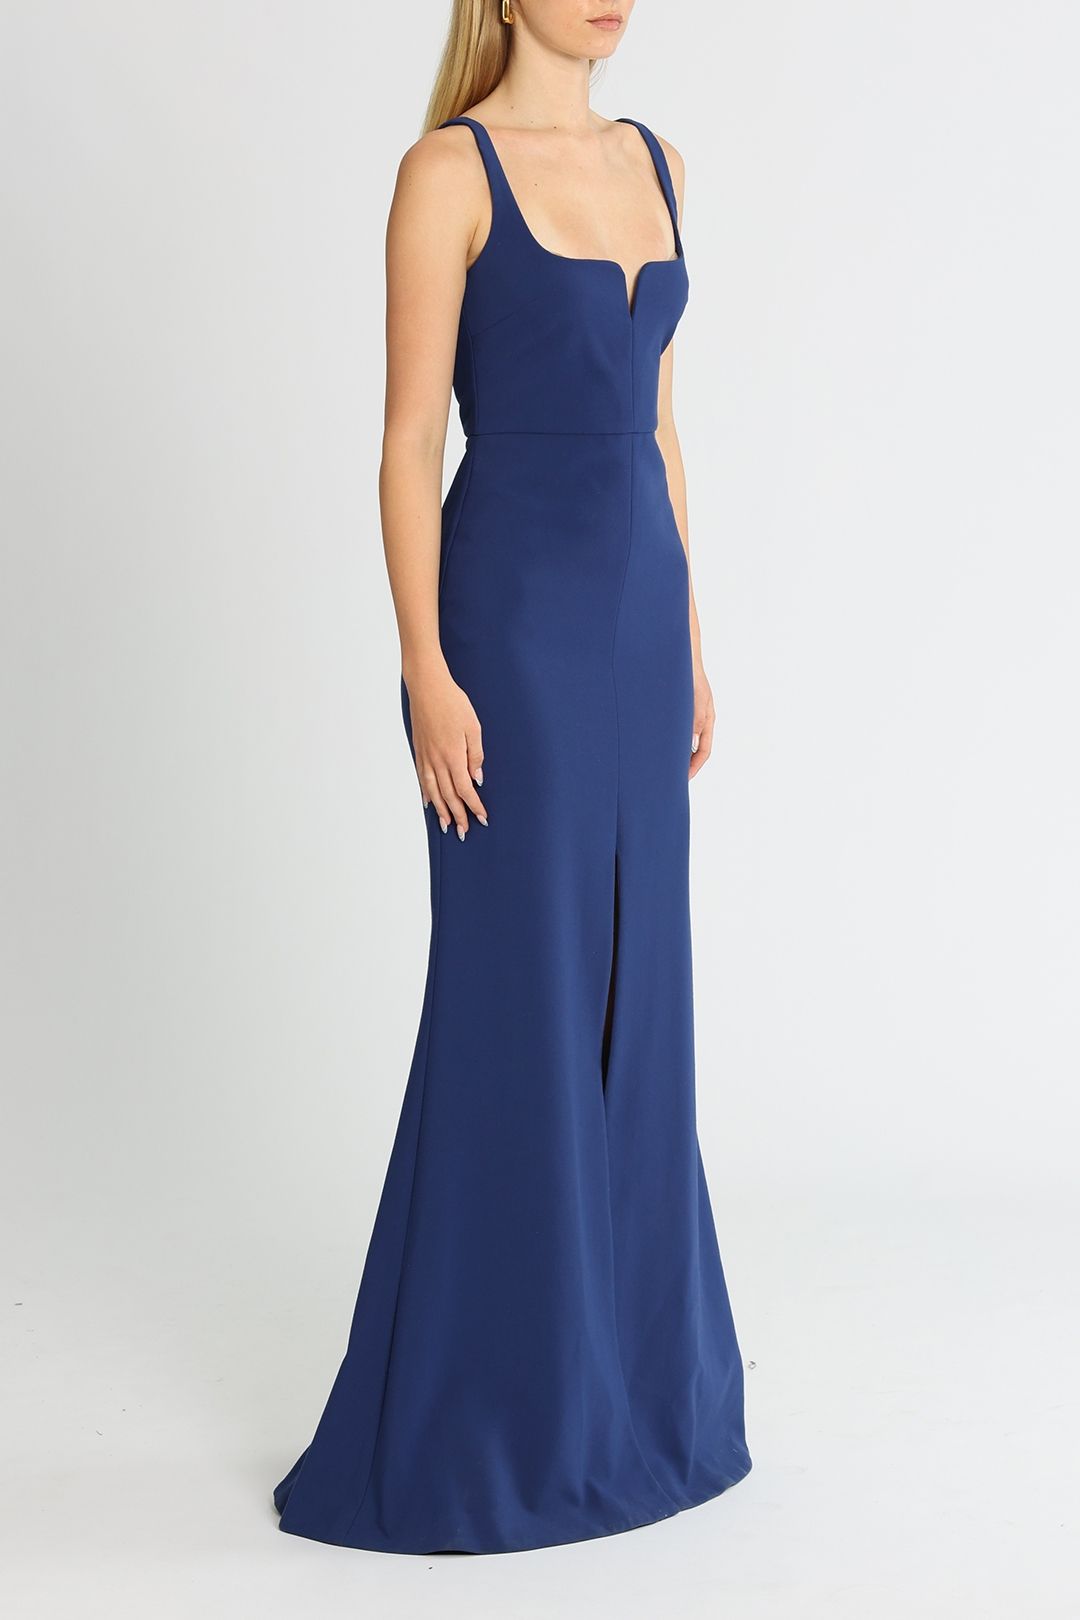 Likely NYC Constance Gown Navy Floor Length